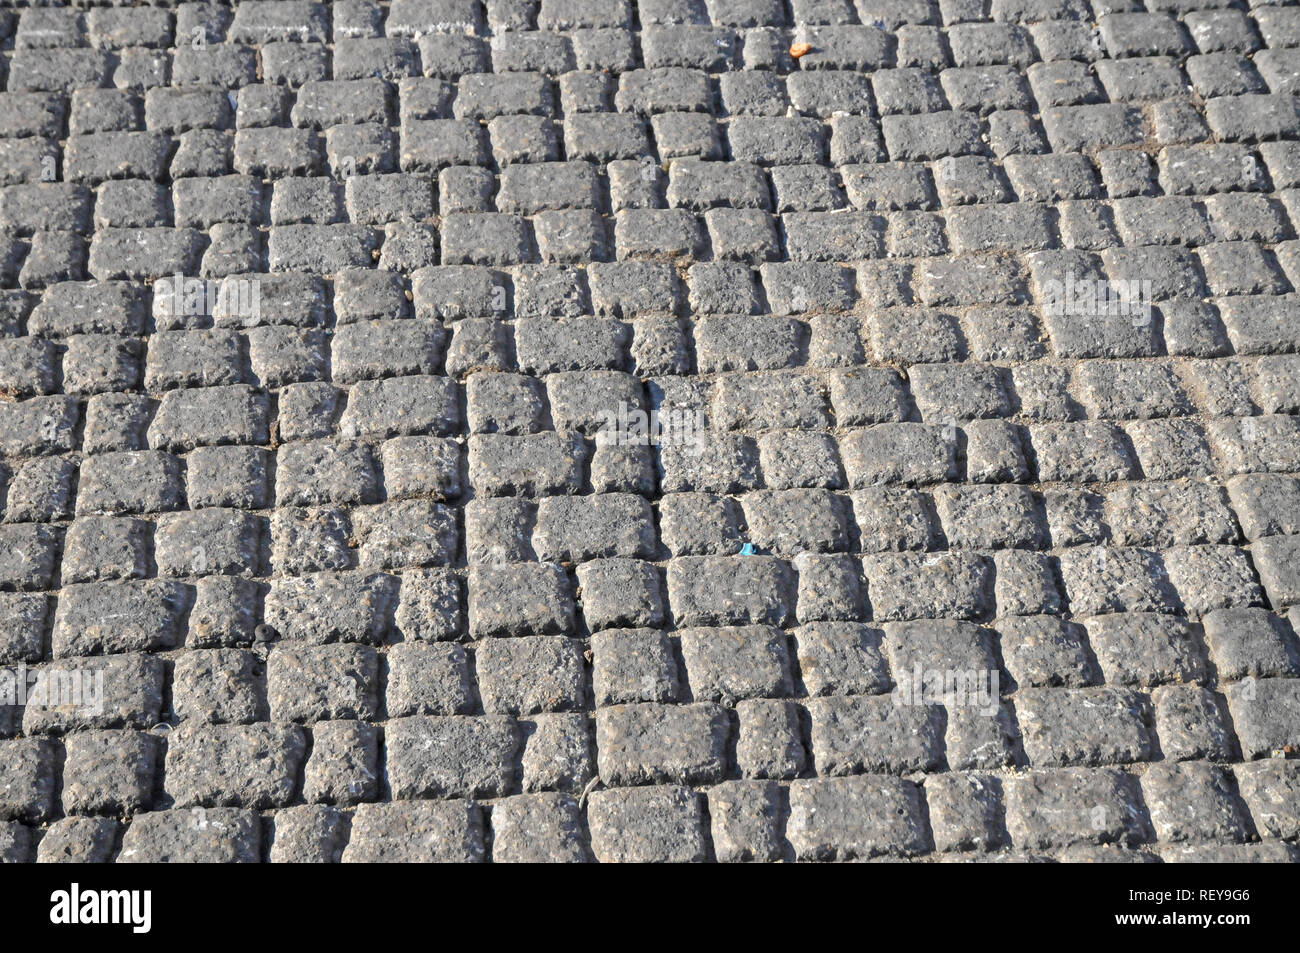 close up of a street paved with paving stones Stock Photo